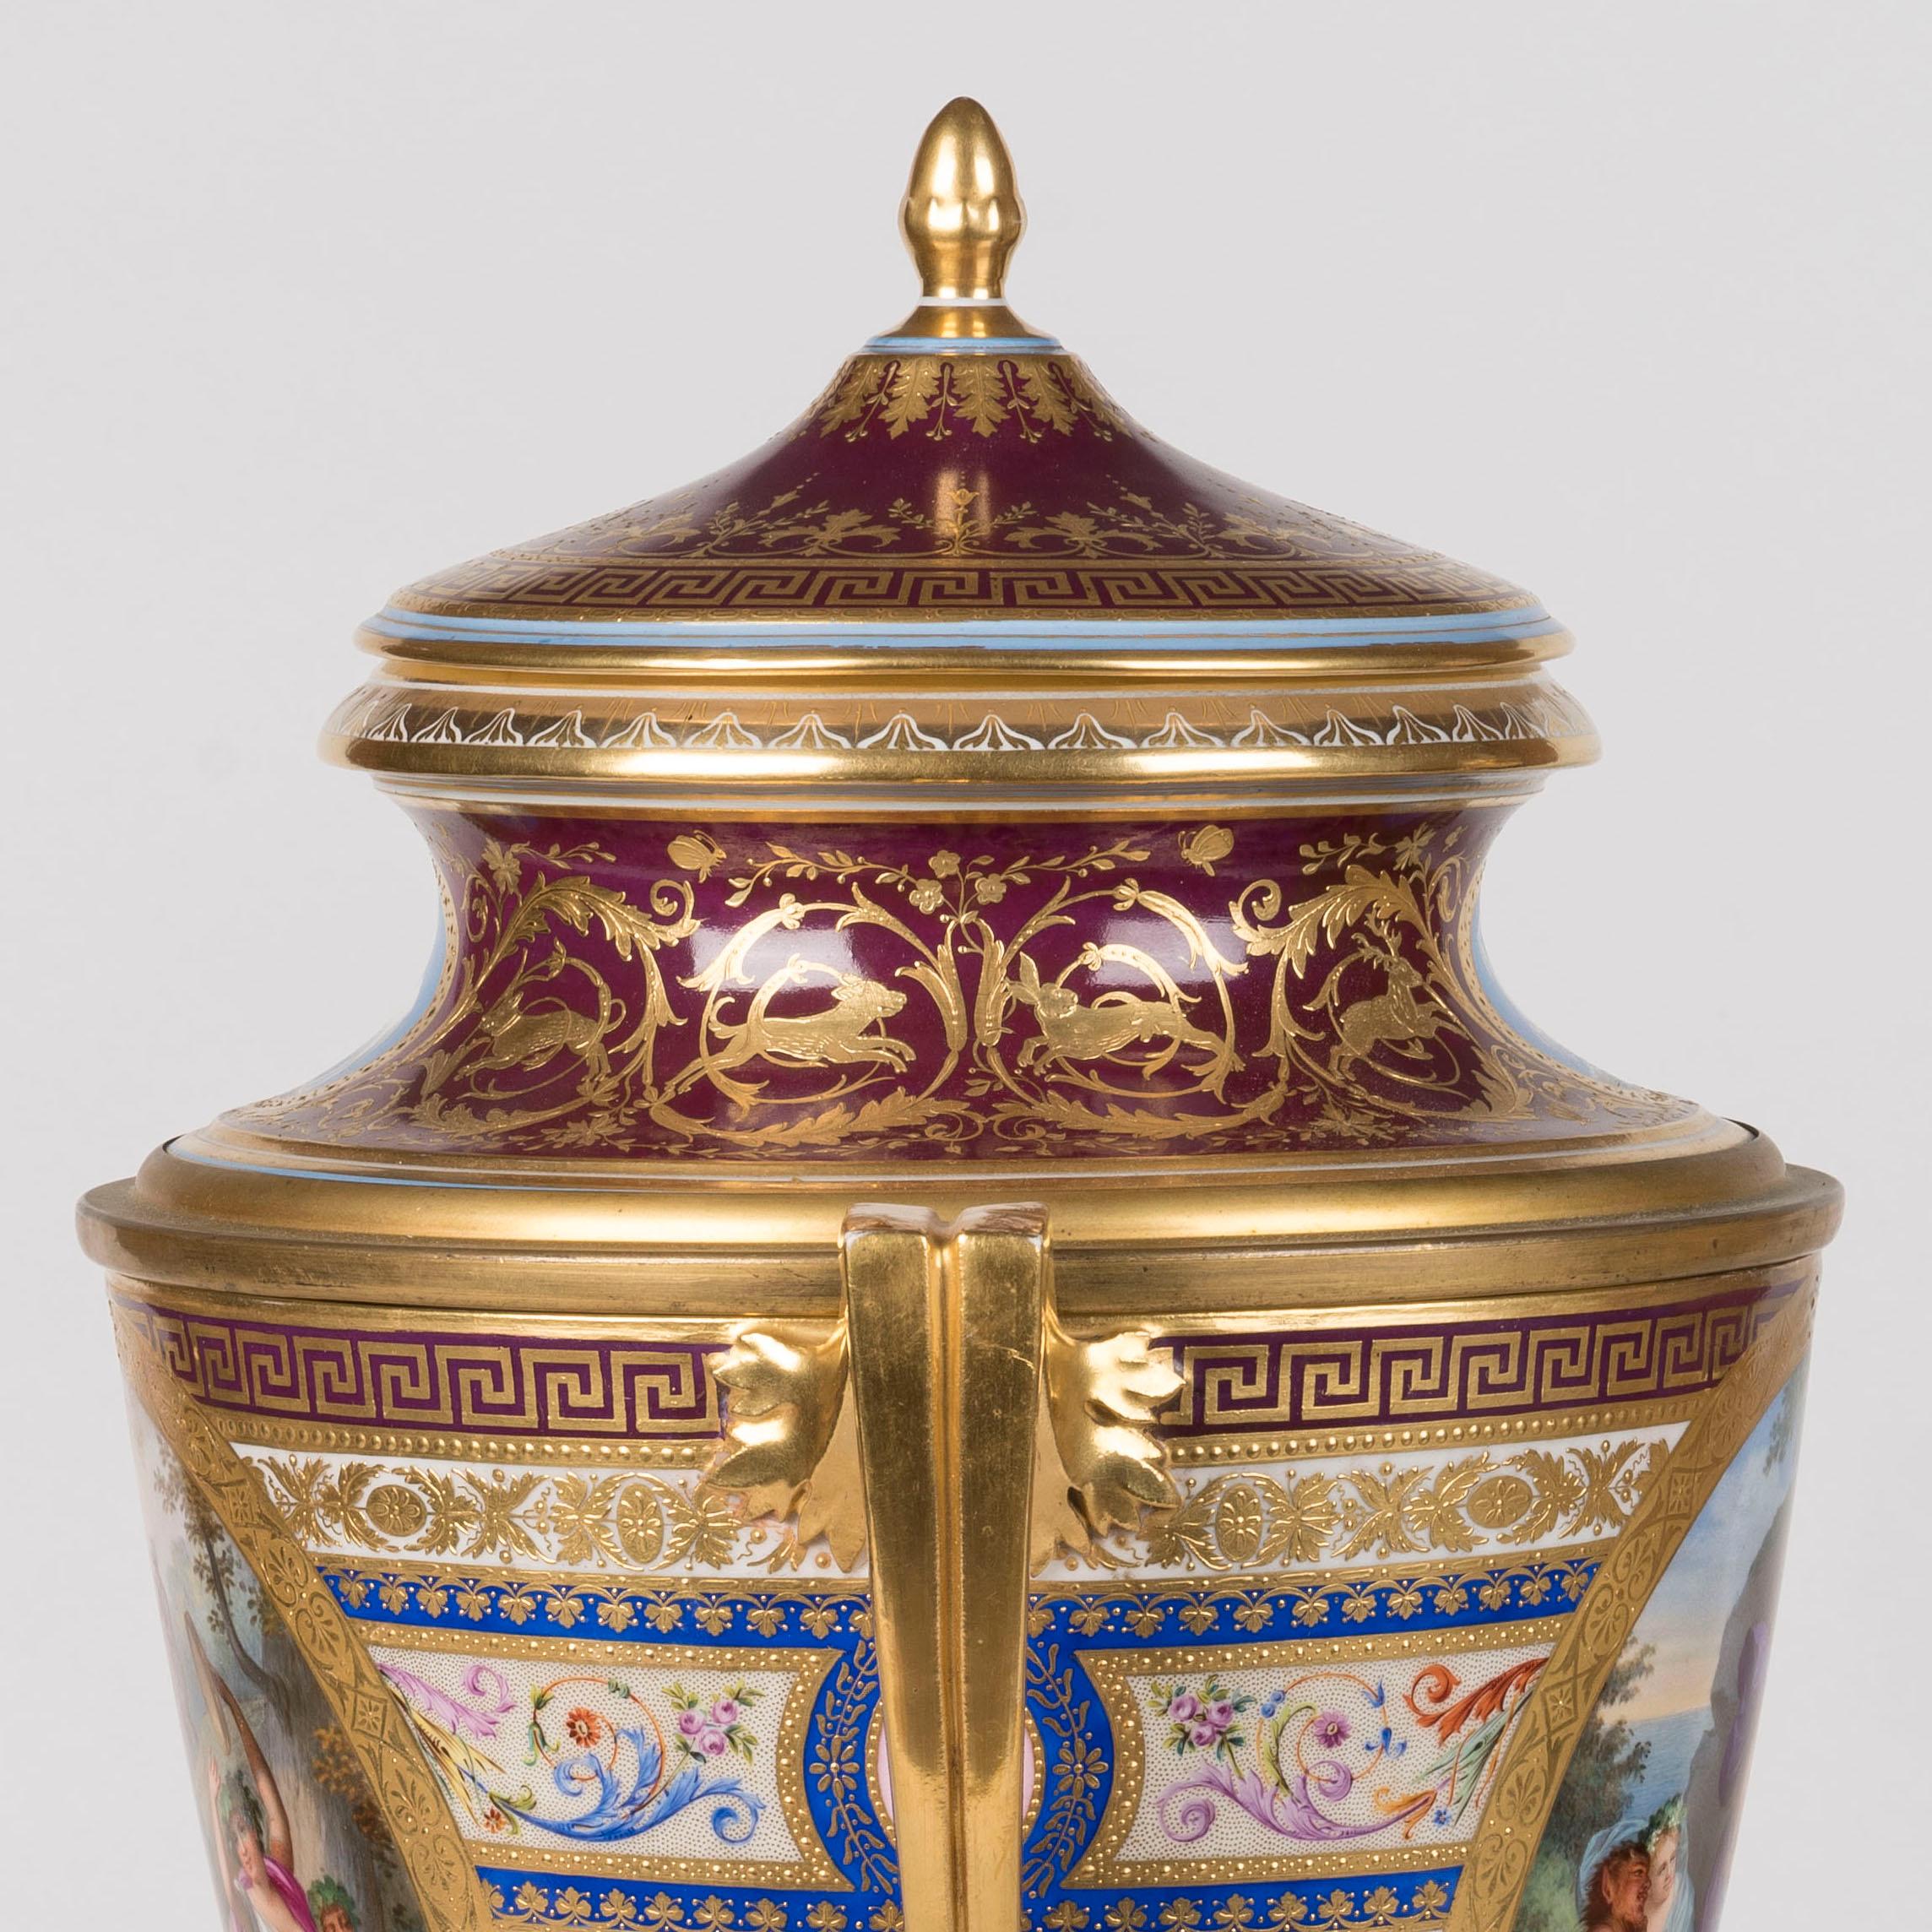 Rare 19th Century Viennese Porcelain Hand-Painted Ice Cream Pail Vases In Good Condition For Sale In London, GB